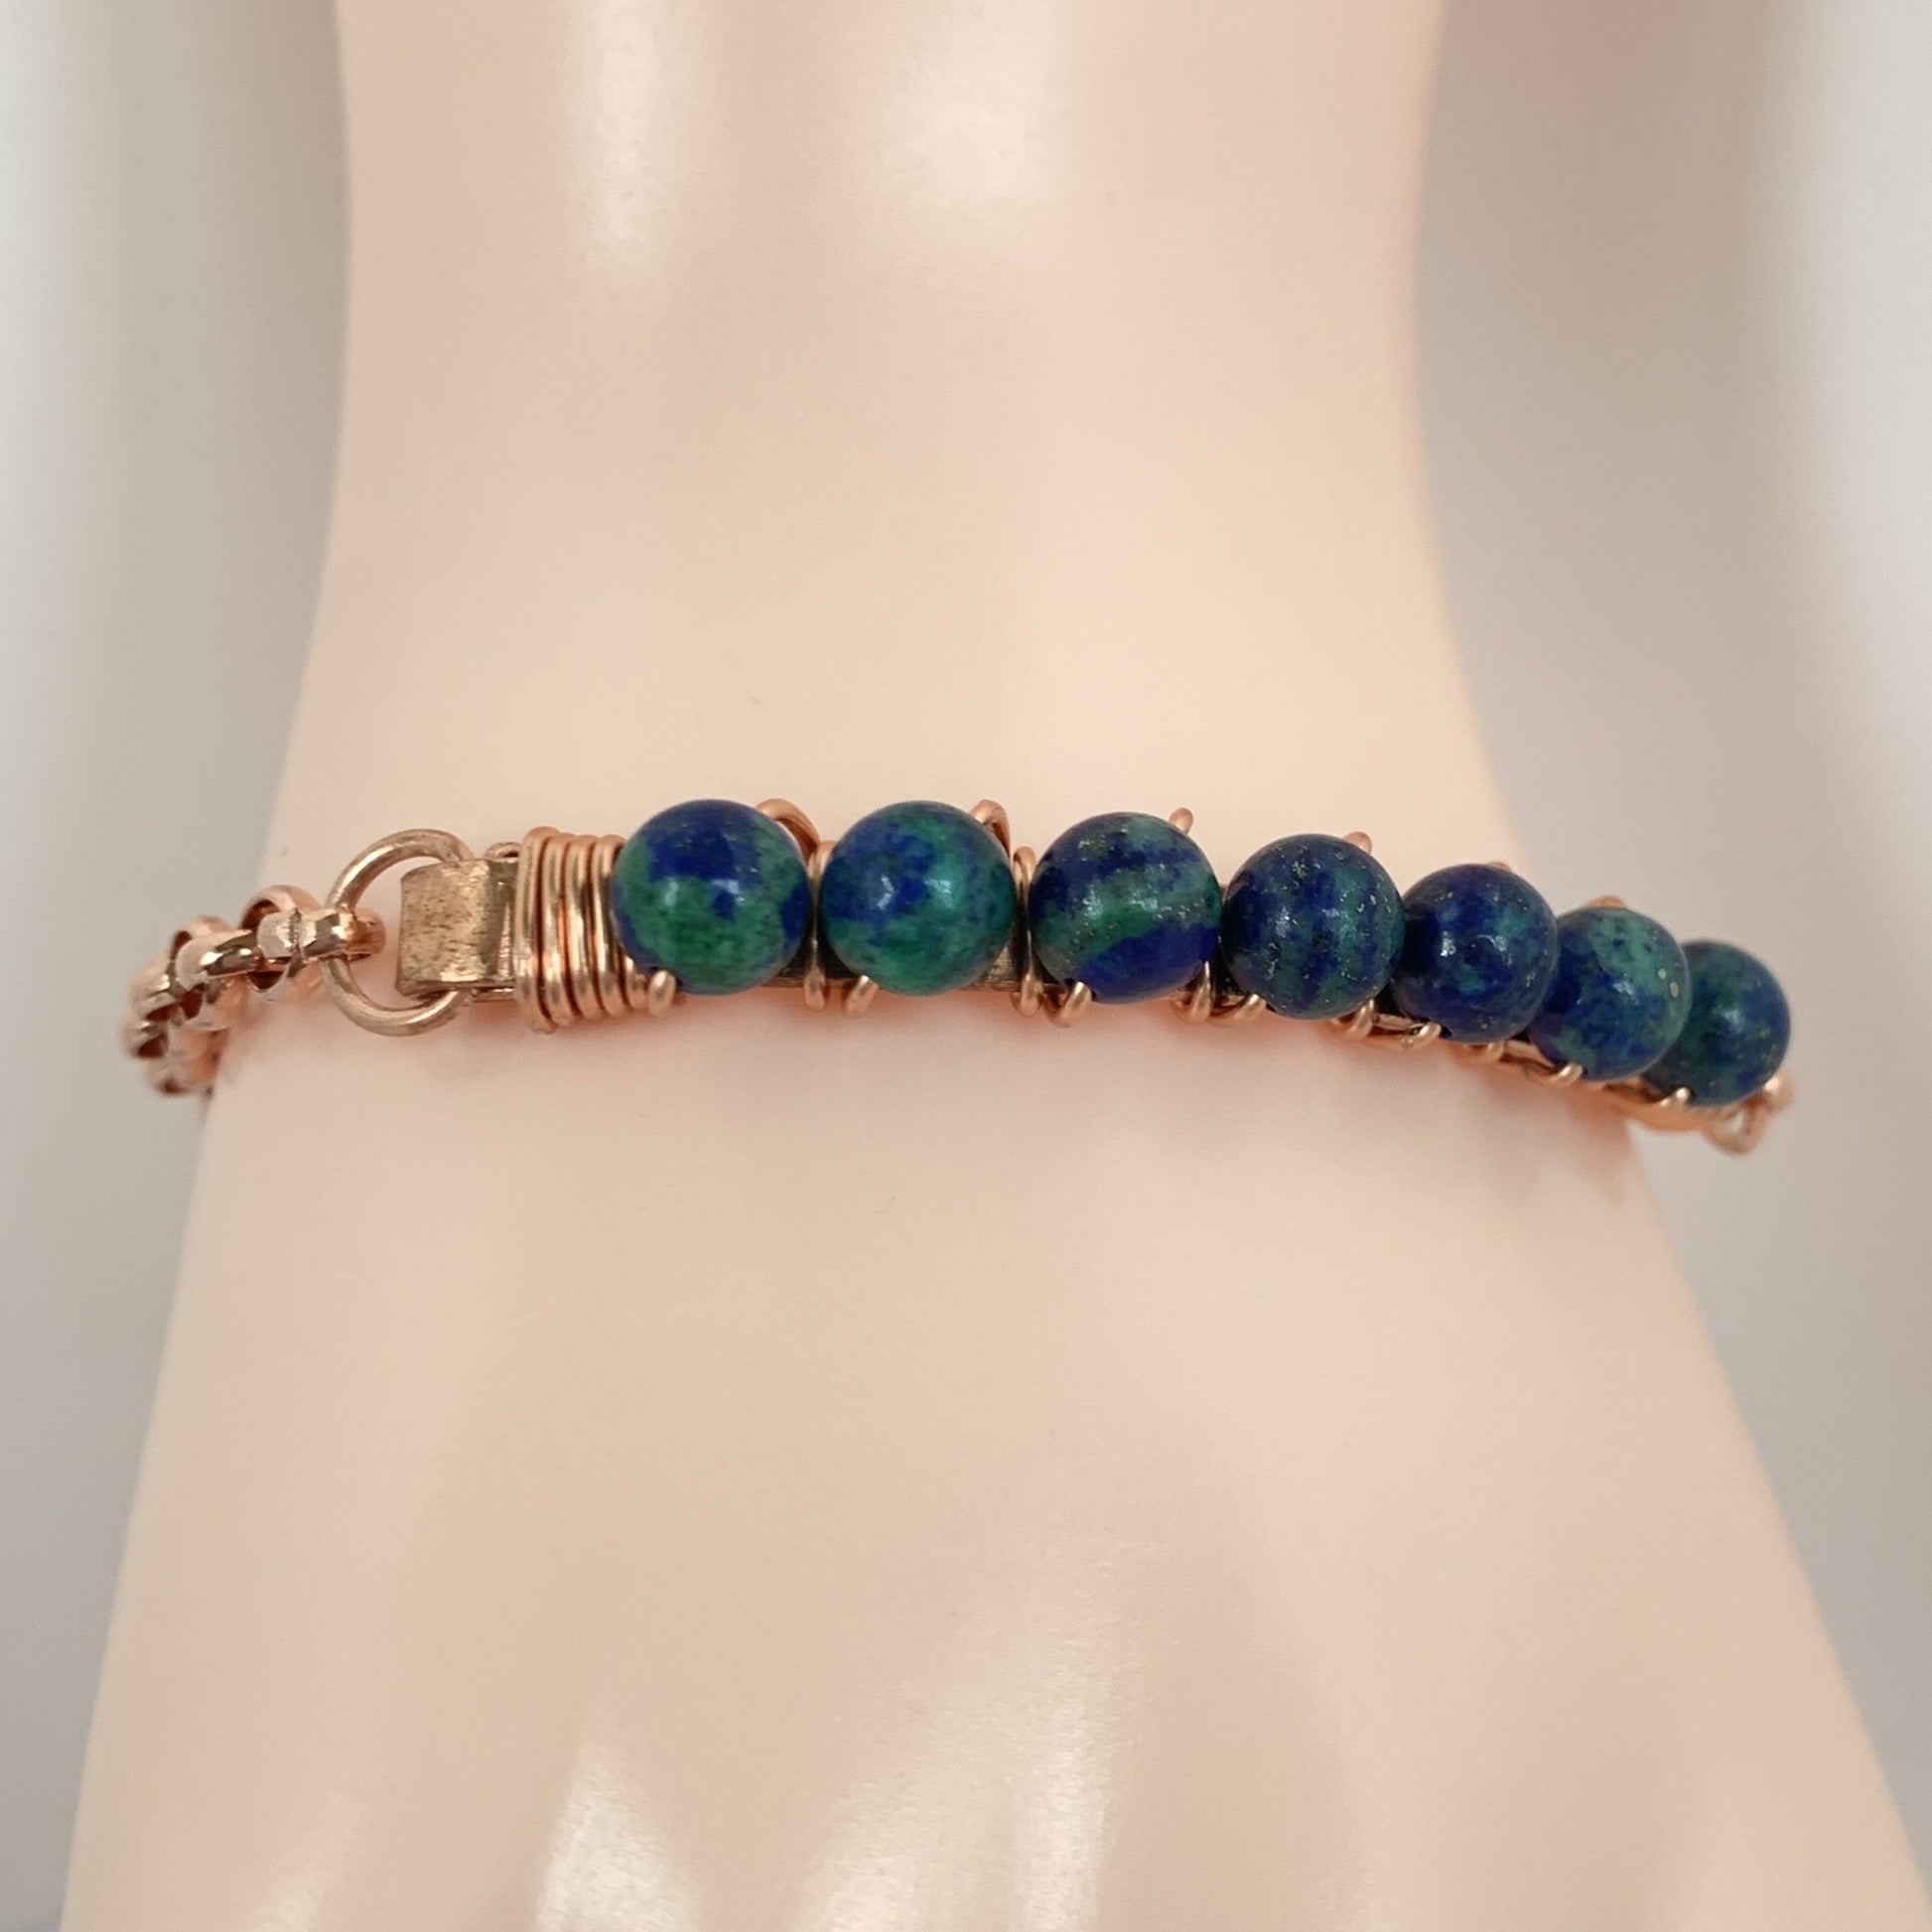 4mm Chrysocolla beads wire wrapped on copper with copper clasp